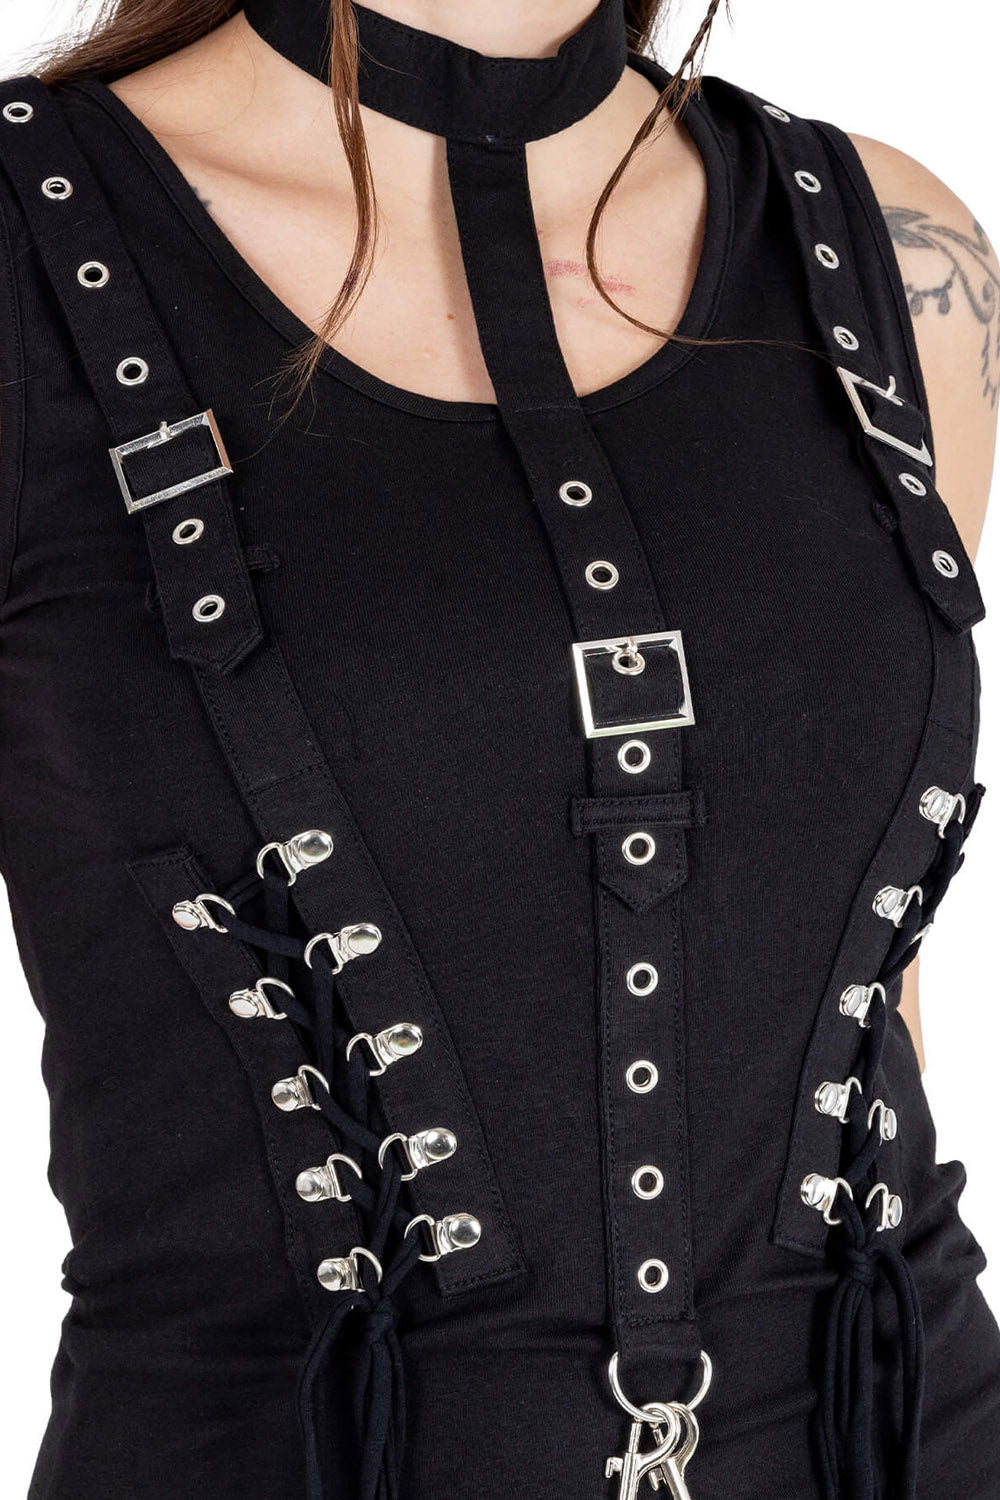 gothic dress with straps and buckles